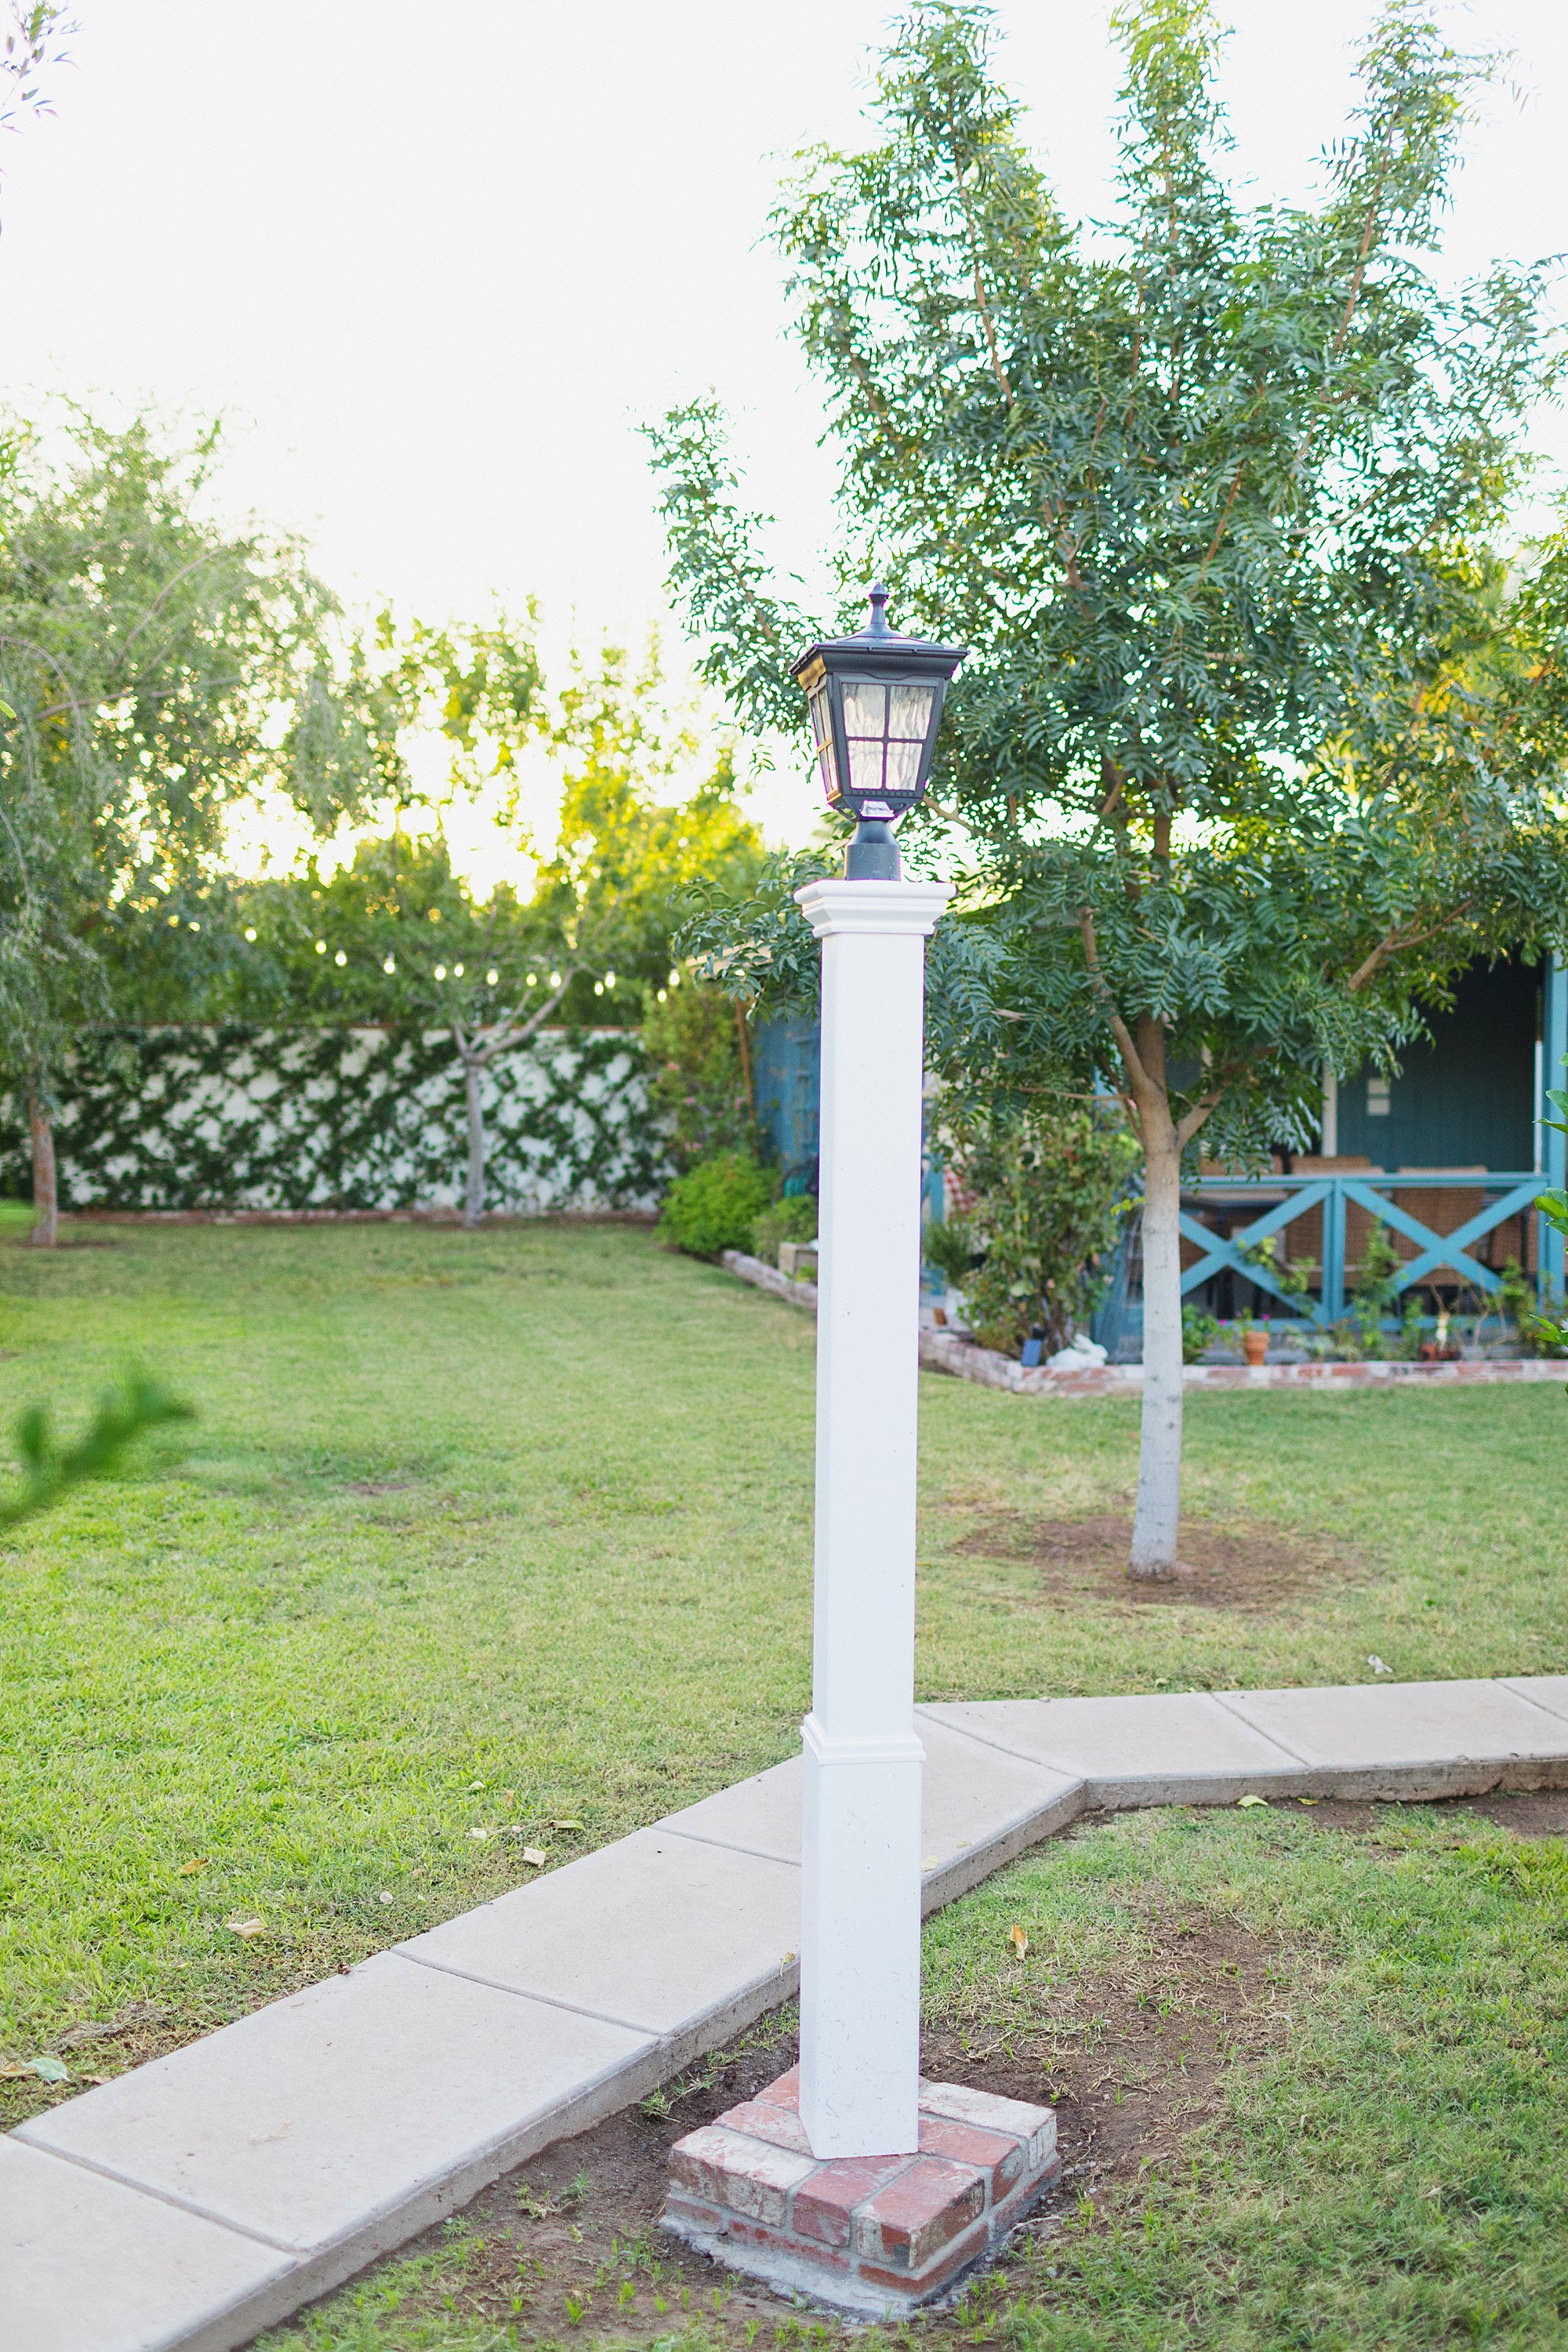 solar light on lamp post affordable no electrician bright LED warm light how to on the blog! coastal style